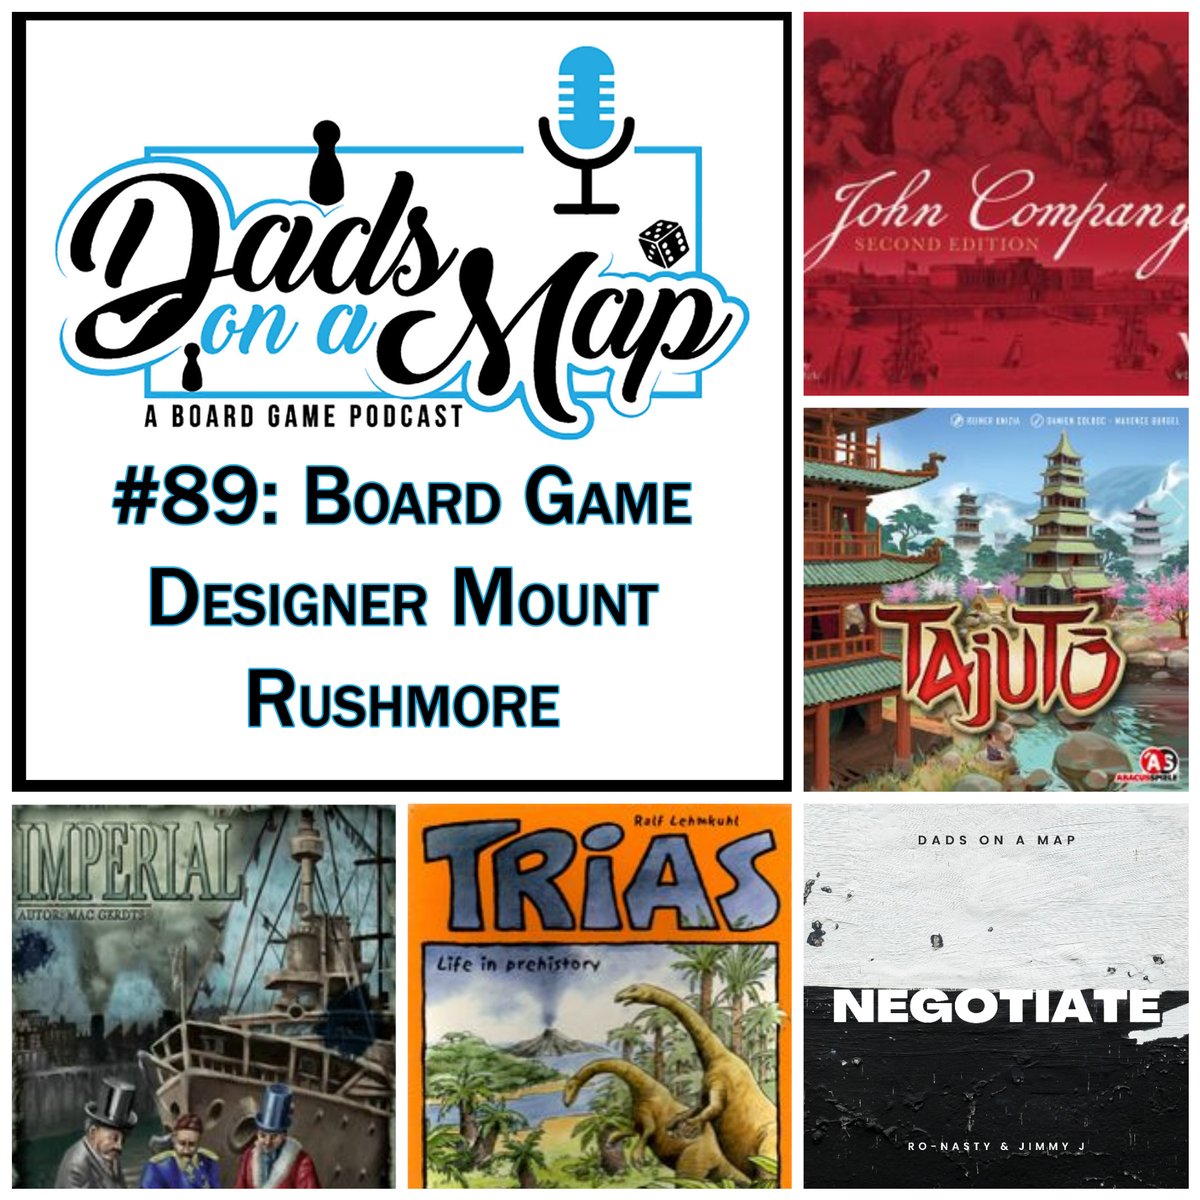 James & Sanchez take a trip to Mount Rushmore, and crown their 4 board game designers most worthy of this accolade. Also recent plays of John Company, Imperial, Trias, Tajuto, and Reef Encounter. And a song - 